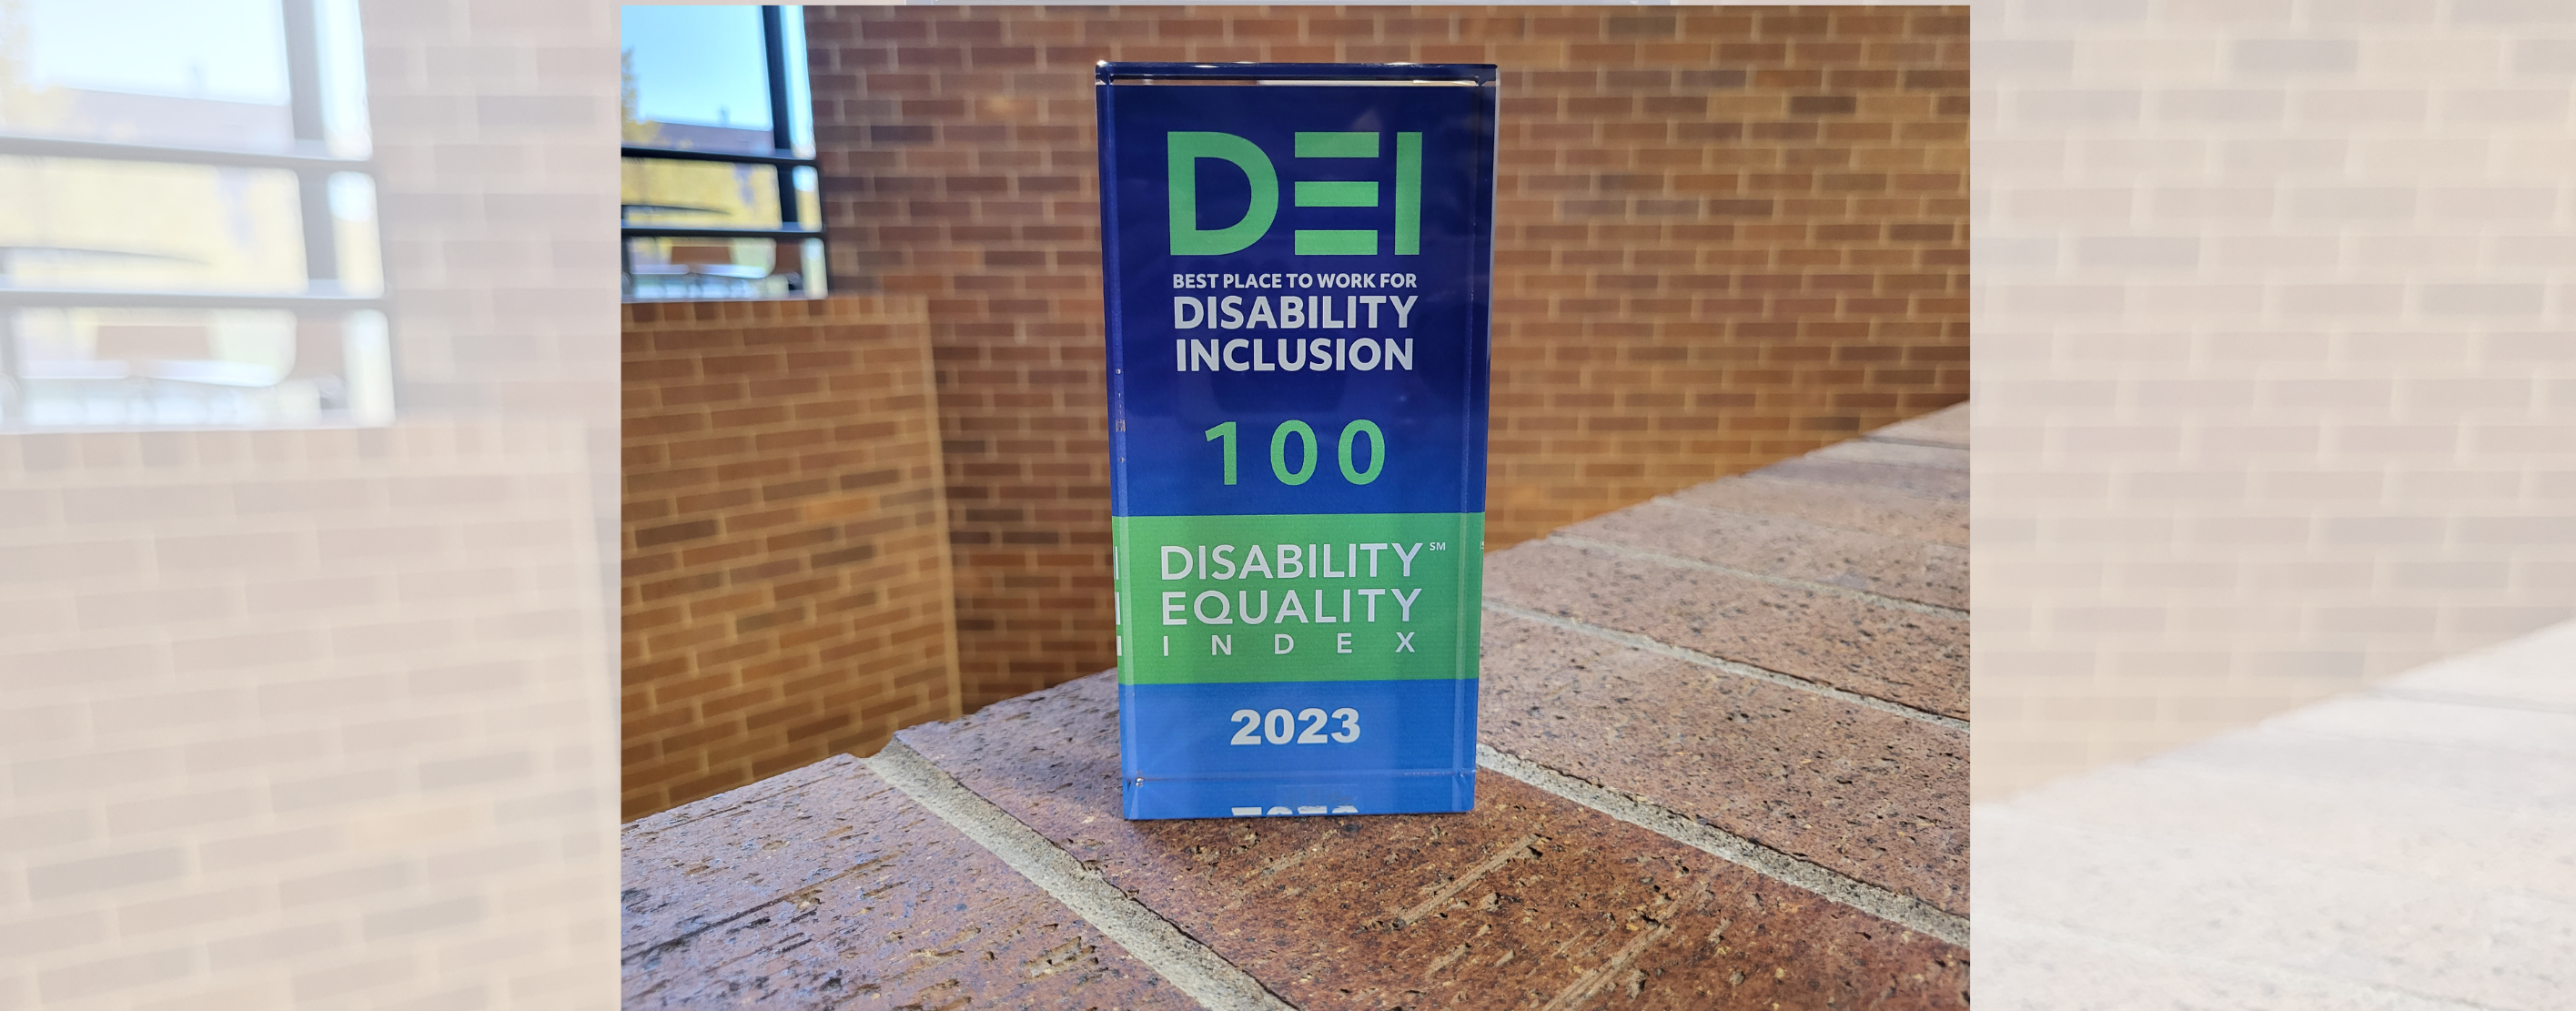 A picture of an award that says "2023 DEI Best Place to Work for Disability Inclusion 100 Disability Quality Index 2023"